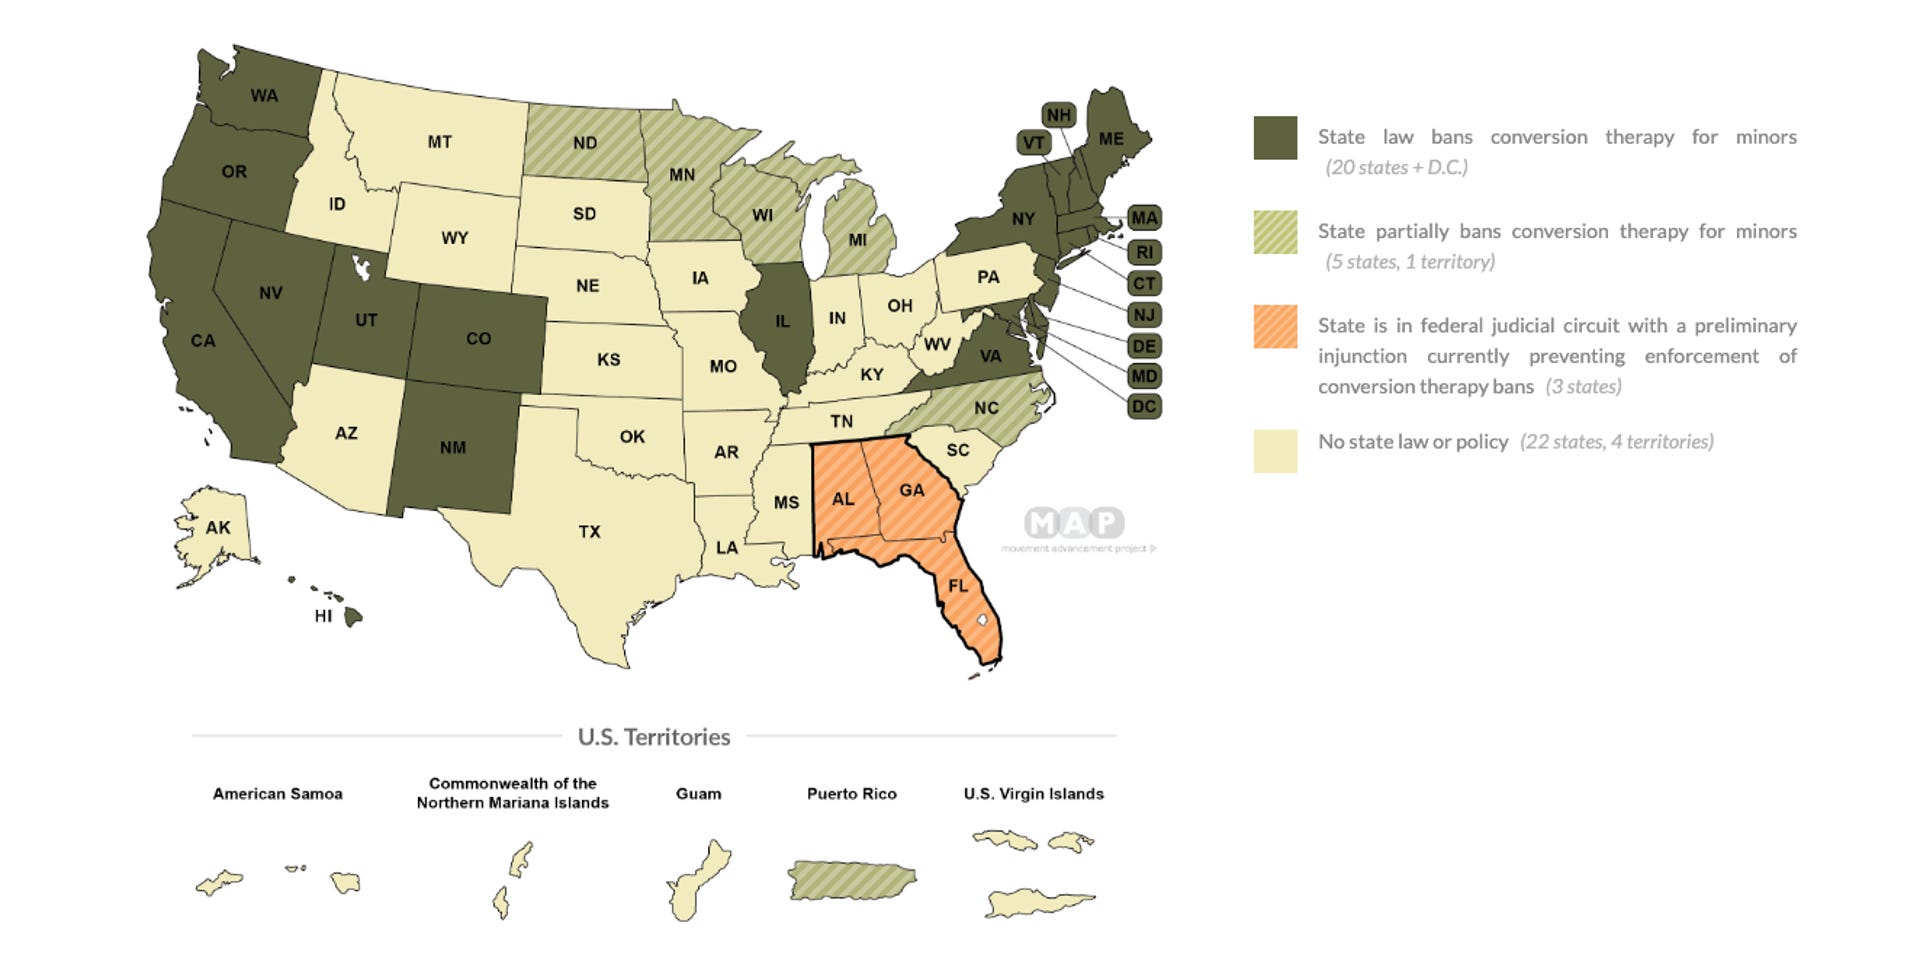 Map of states and territories with laws banning LGBTQ conversion therapy